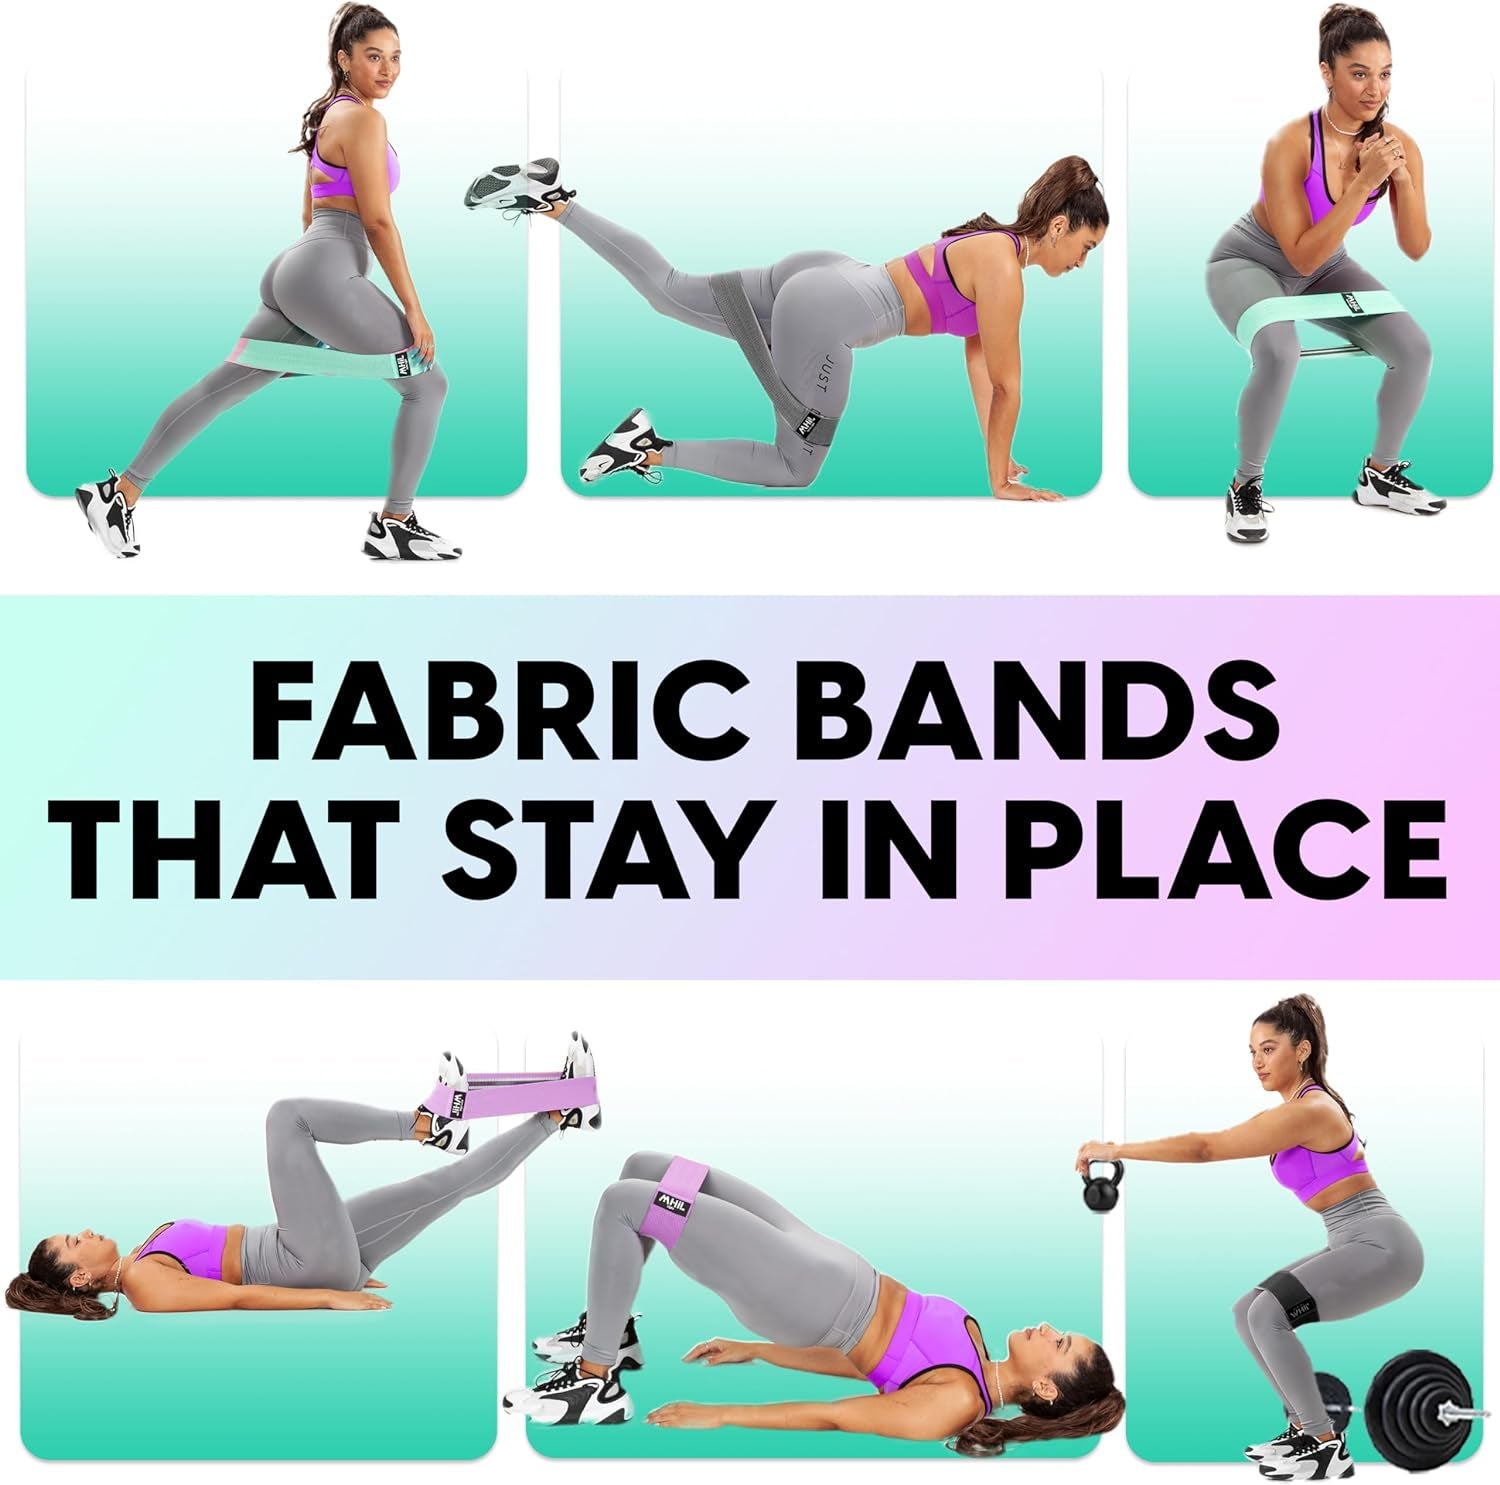 Fabric Resistance Bands for Working Out - 5 Booty Bands for Women and Men, Best Exercise Band Workout Bands for Workout Legs Butt Glute Hip - Gym Loop Fitness Bands Set for Home with Training Guide